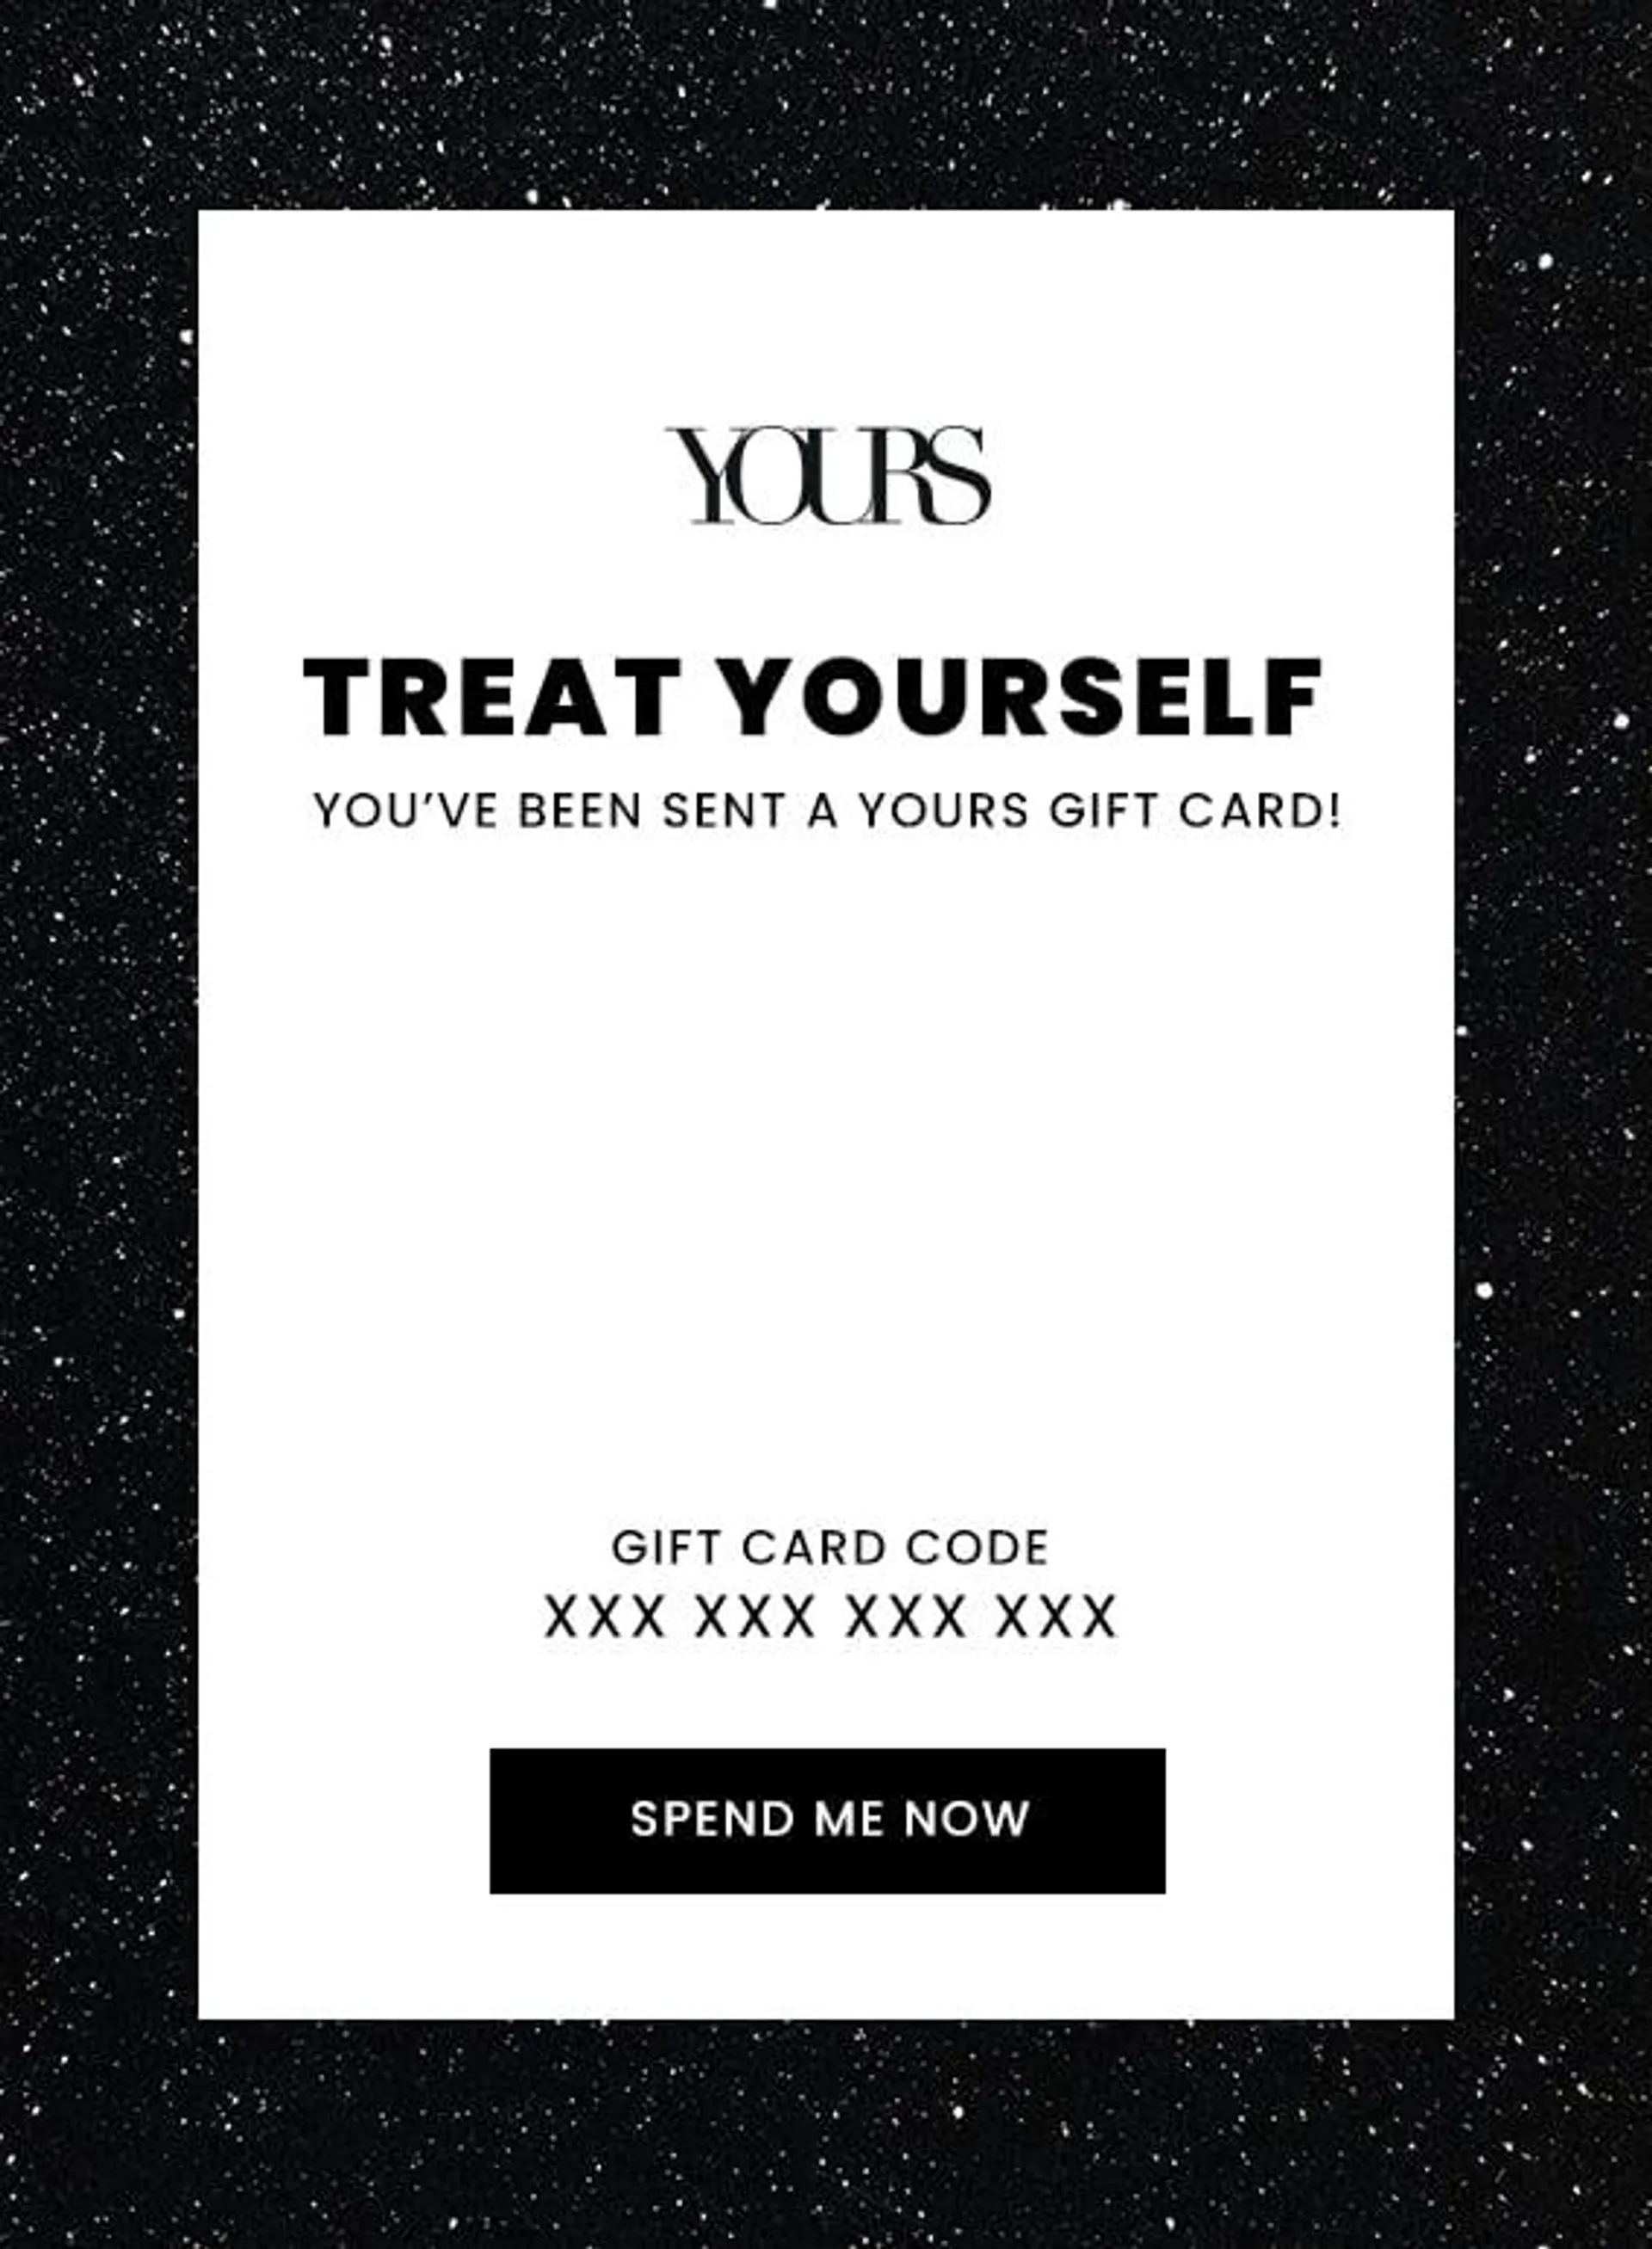 £10 - £150 Online Gift Card